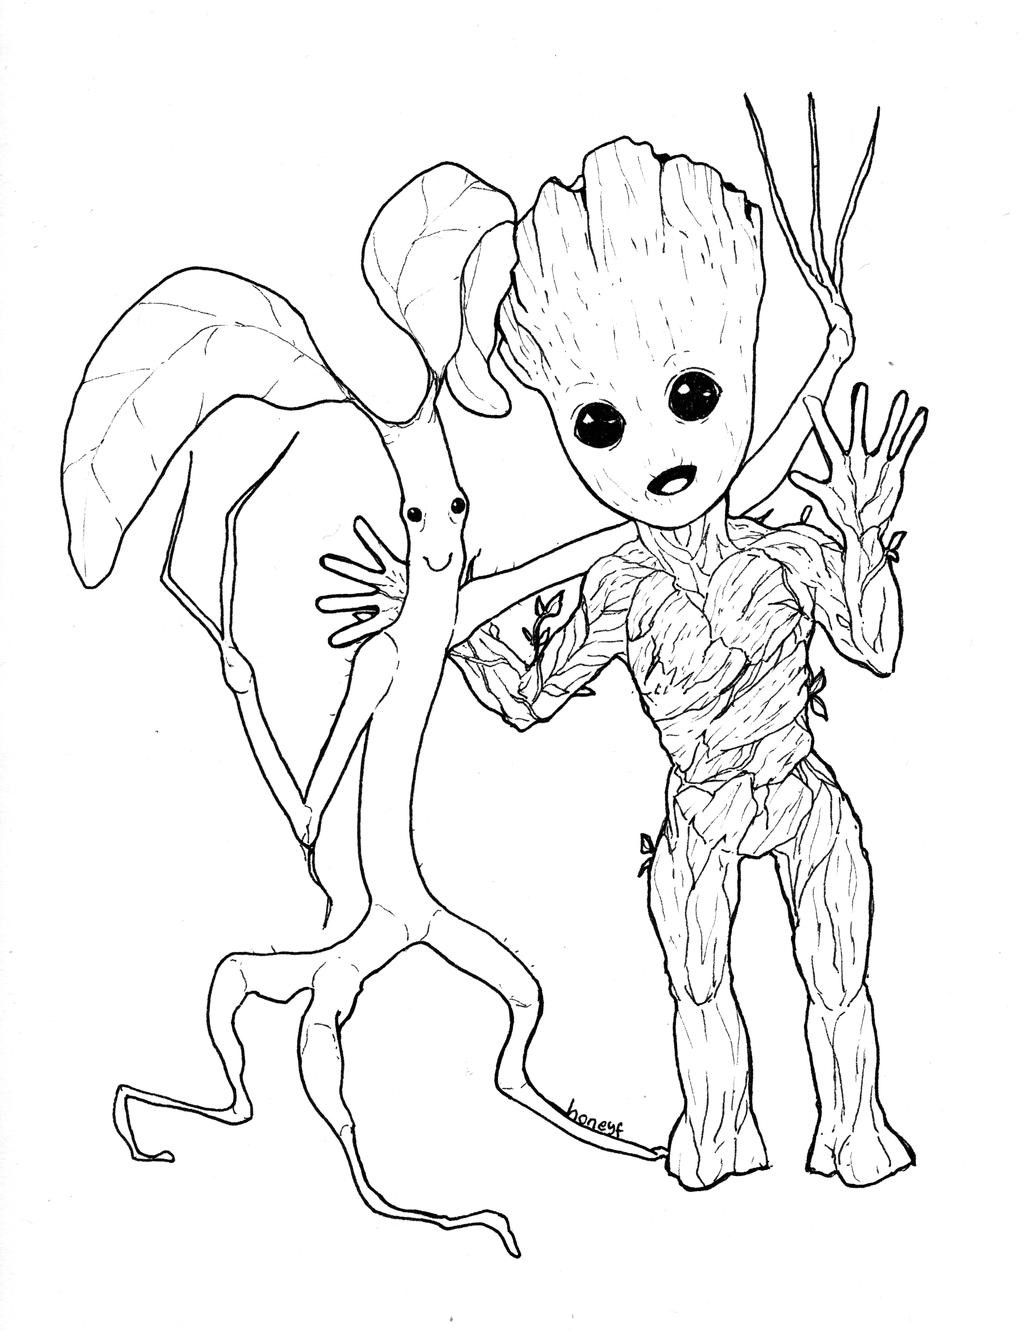 Baby Groot Coloring Page
 Picket Baby Groot by honeyf on DeviantArt